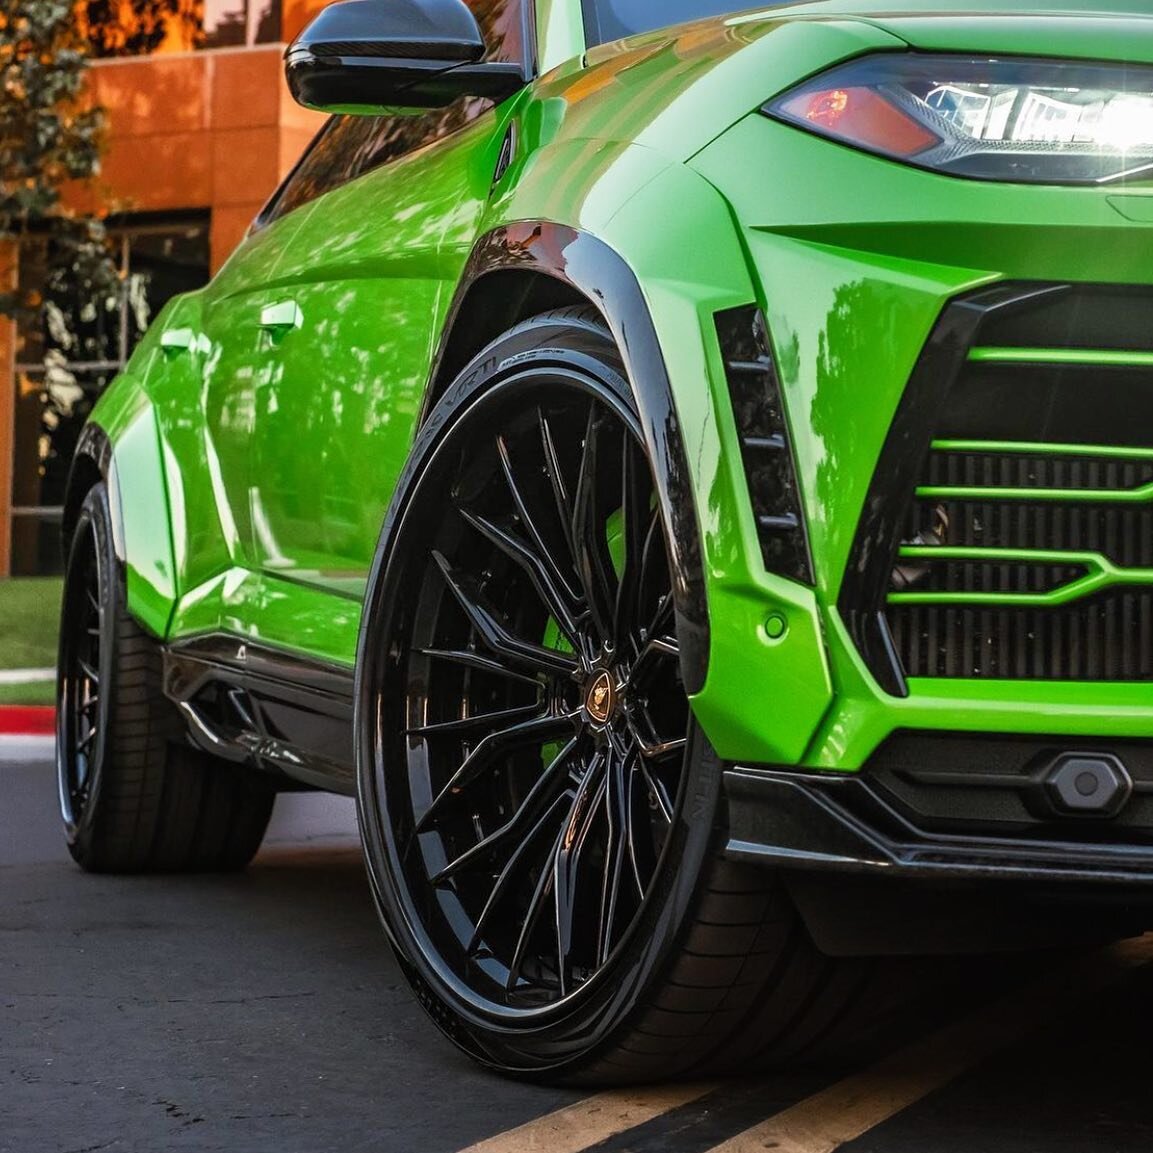 AG Luxury AGL 67 fitted onto this sexy Lamborghini Urus. Custom tailored to your specs. Fitment on point always! Contact us today for Wholesale inquiries! #agluxurywheels #agl #agwheels #agforged #customtailored #modifiedconcepts #lamborghini #urus #